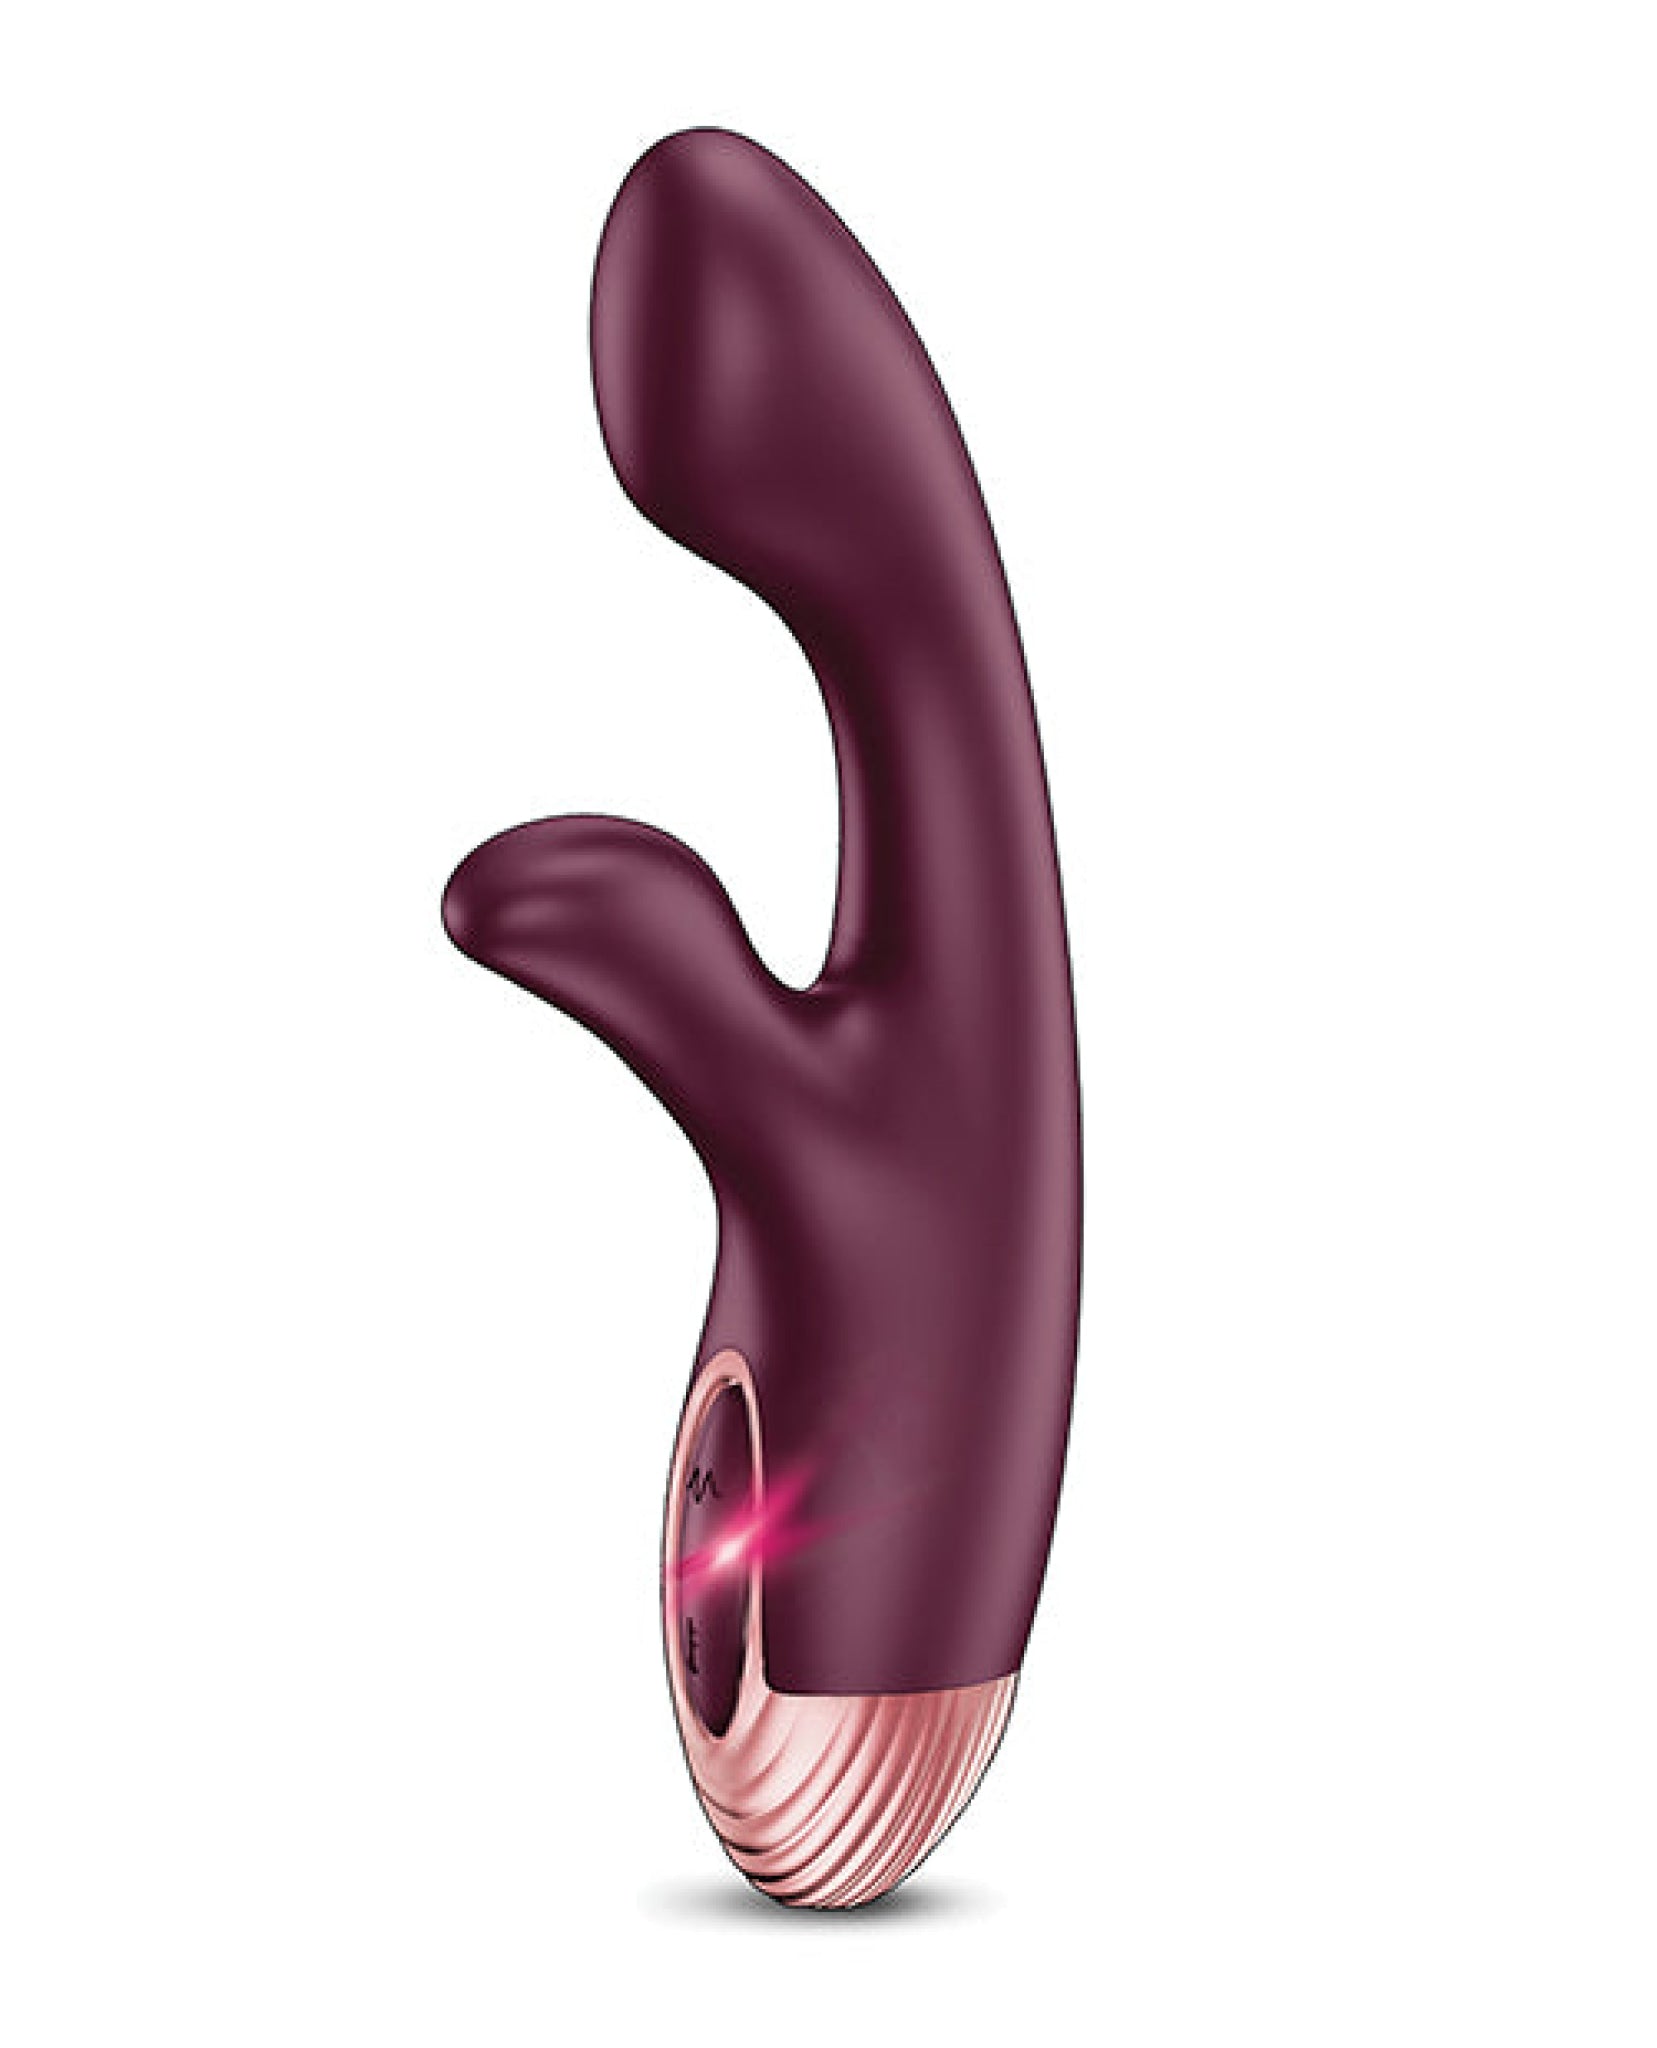 Zola Rechargeable Silicone Dual Massager - Burgundy-rose Gold Zola